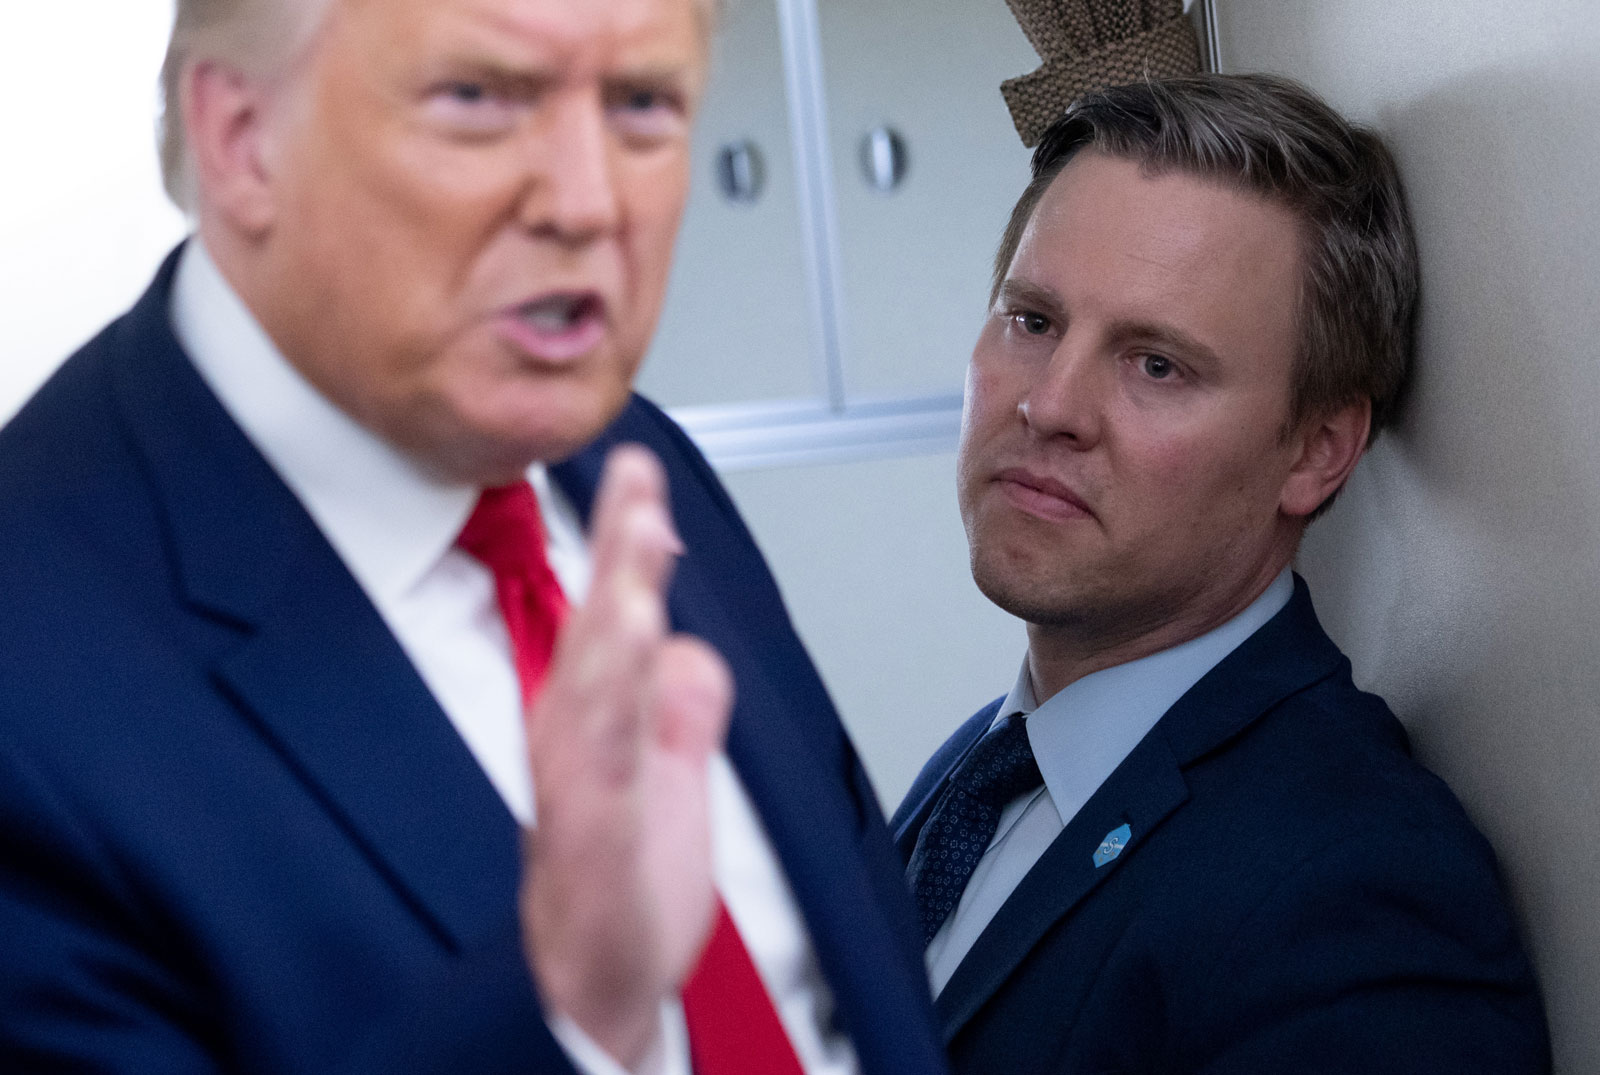 In this August 28 file photo, Campaign manager Bill Stepien stands alongside US President Donald Trump as he speaks with reporters aboard Air Force One.